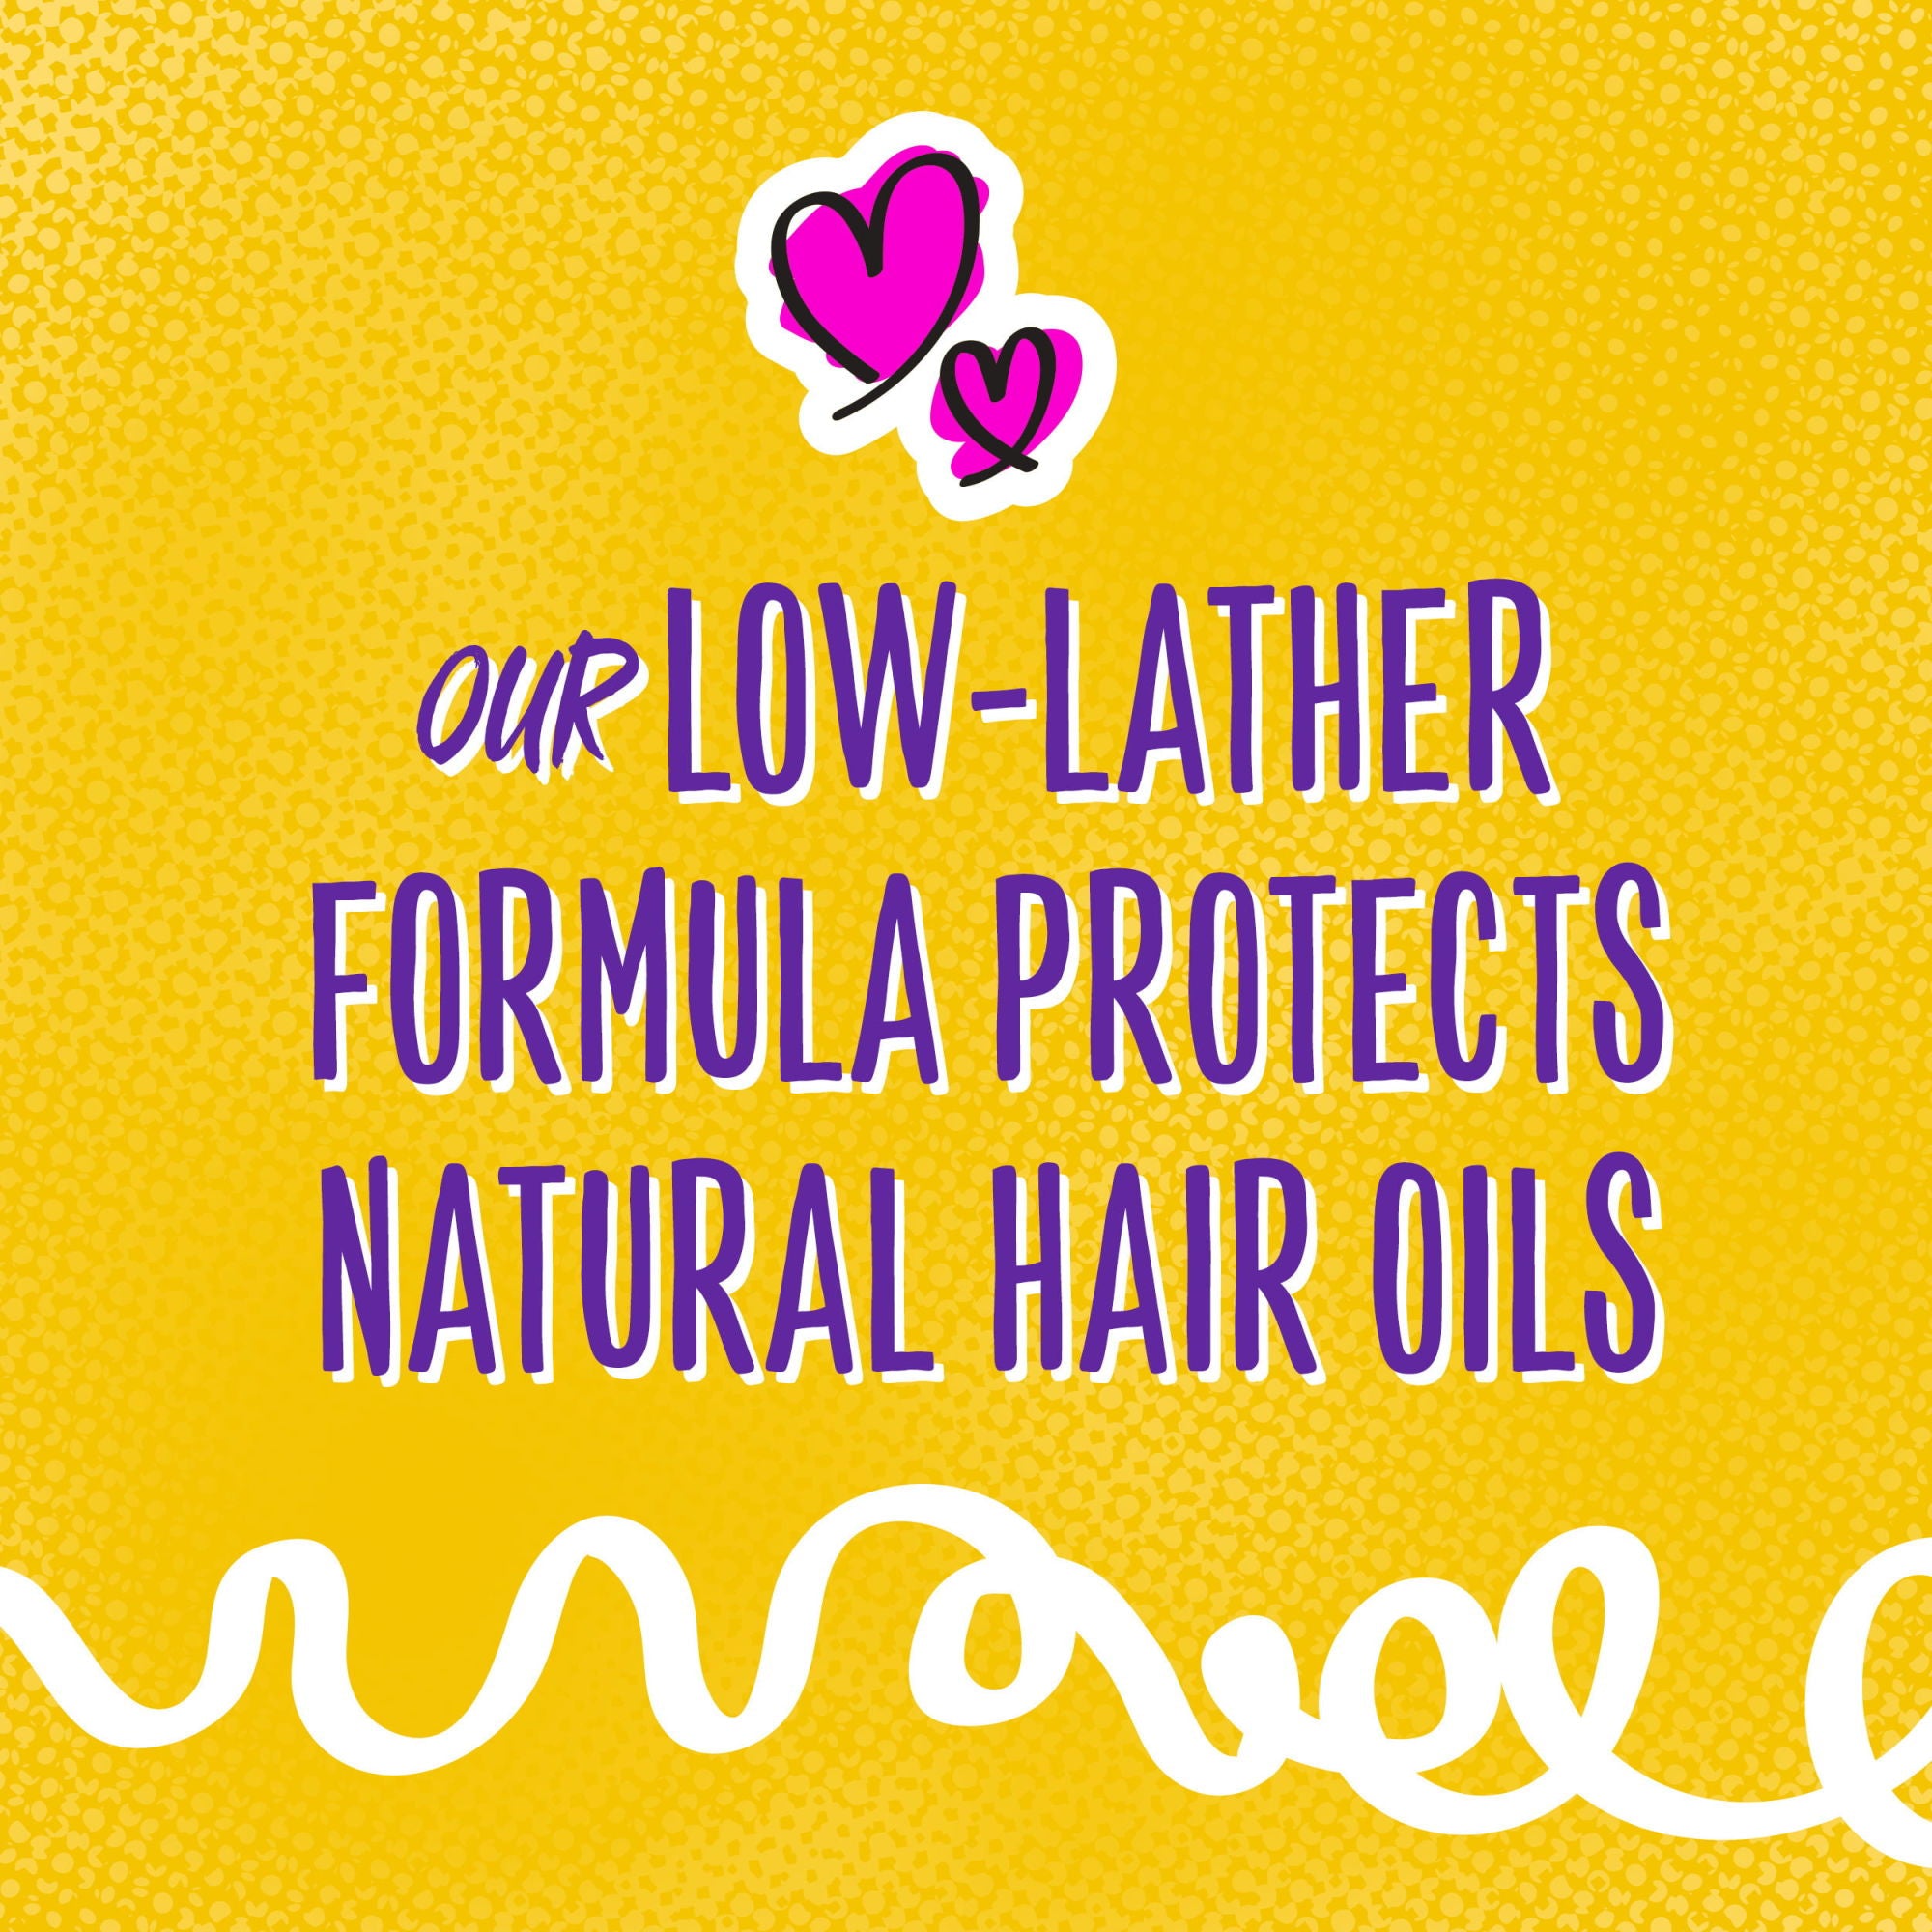 Sentence with Product Name: Aussie Paraben-Free Miracle Curls Co-Wash w/ Coconut & Jojoba Oil For Curly Hair; 16.9 fl oz bottle with pump dispenser, featuring coconut & jojoba oil on the purple label.